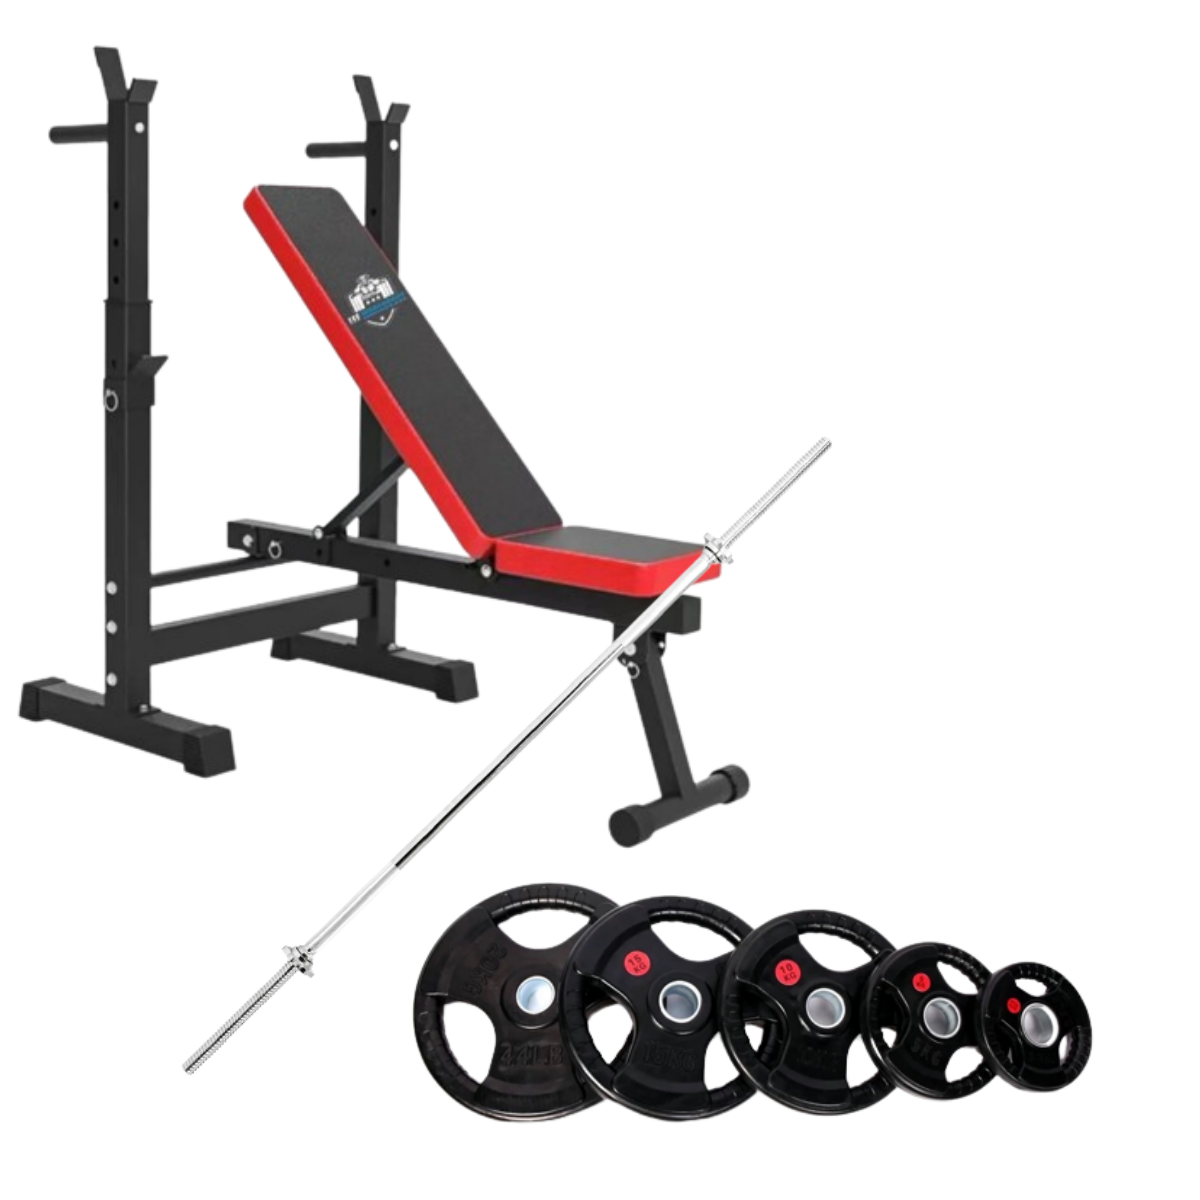 Adjustable Bench with 25mm Barbell and 80kg Weights